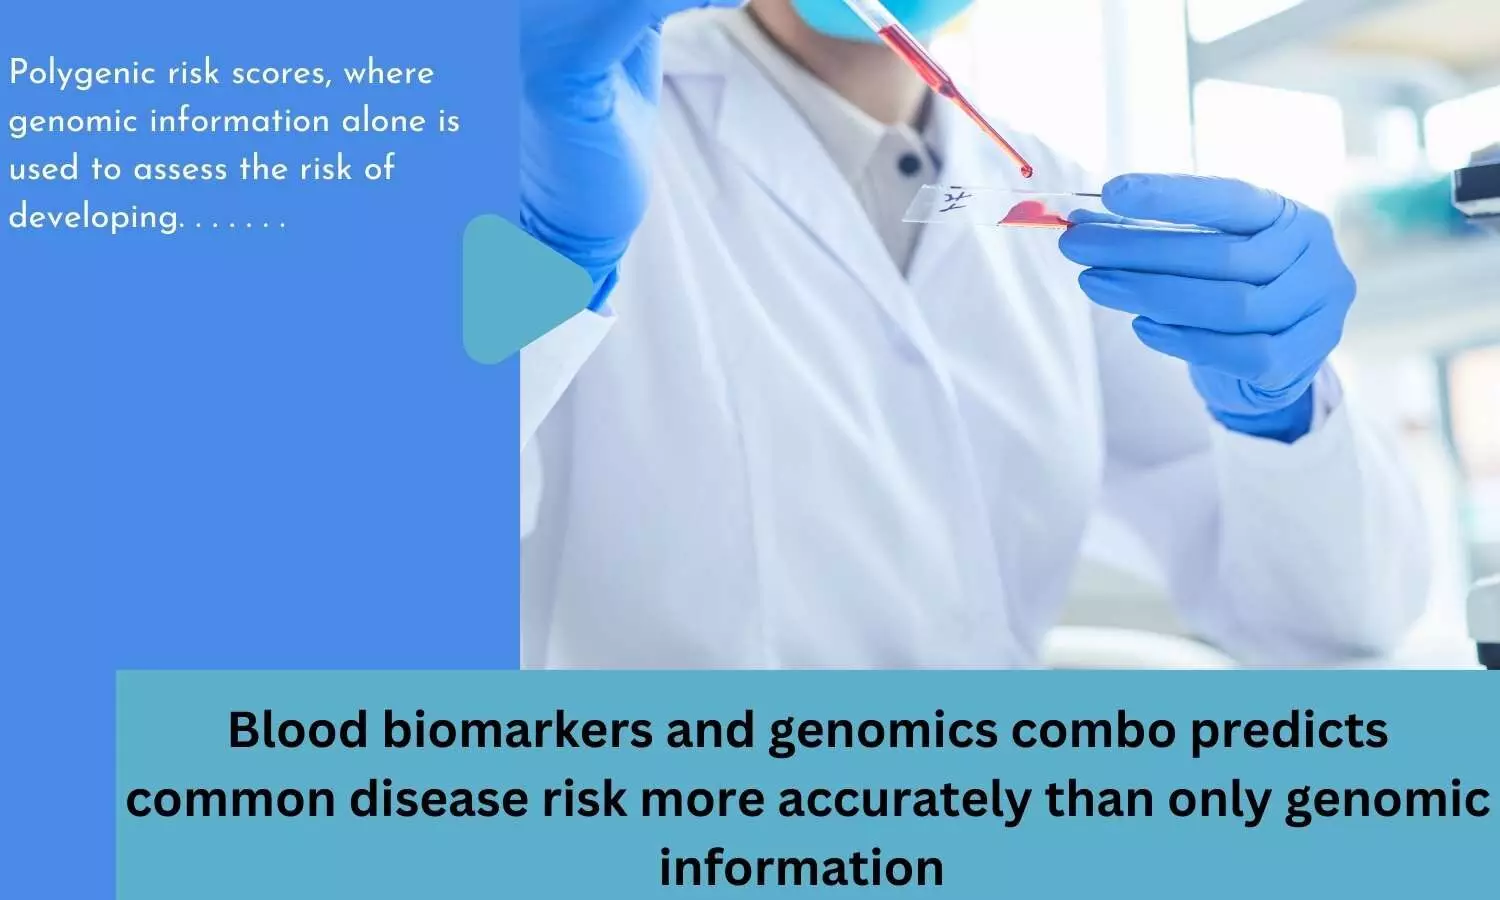 Blood biomarkers and genomics combo predicts common disease risk more accurately than only genomic information